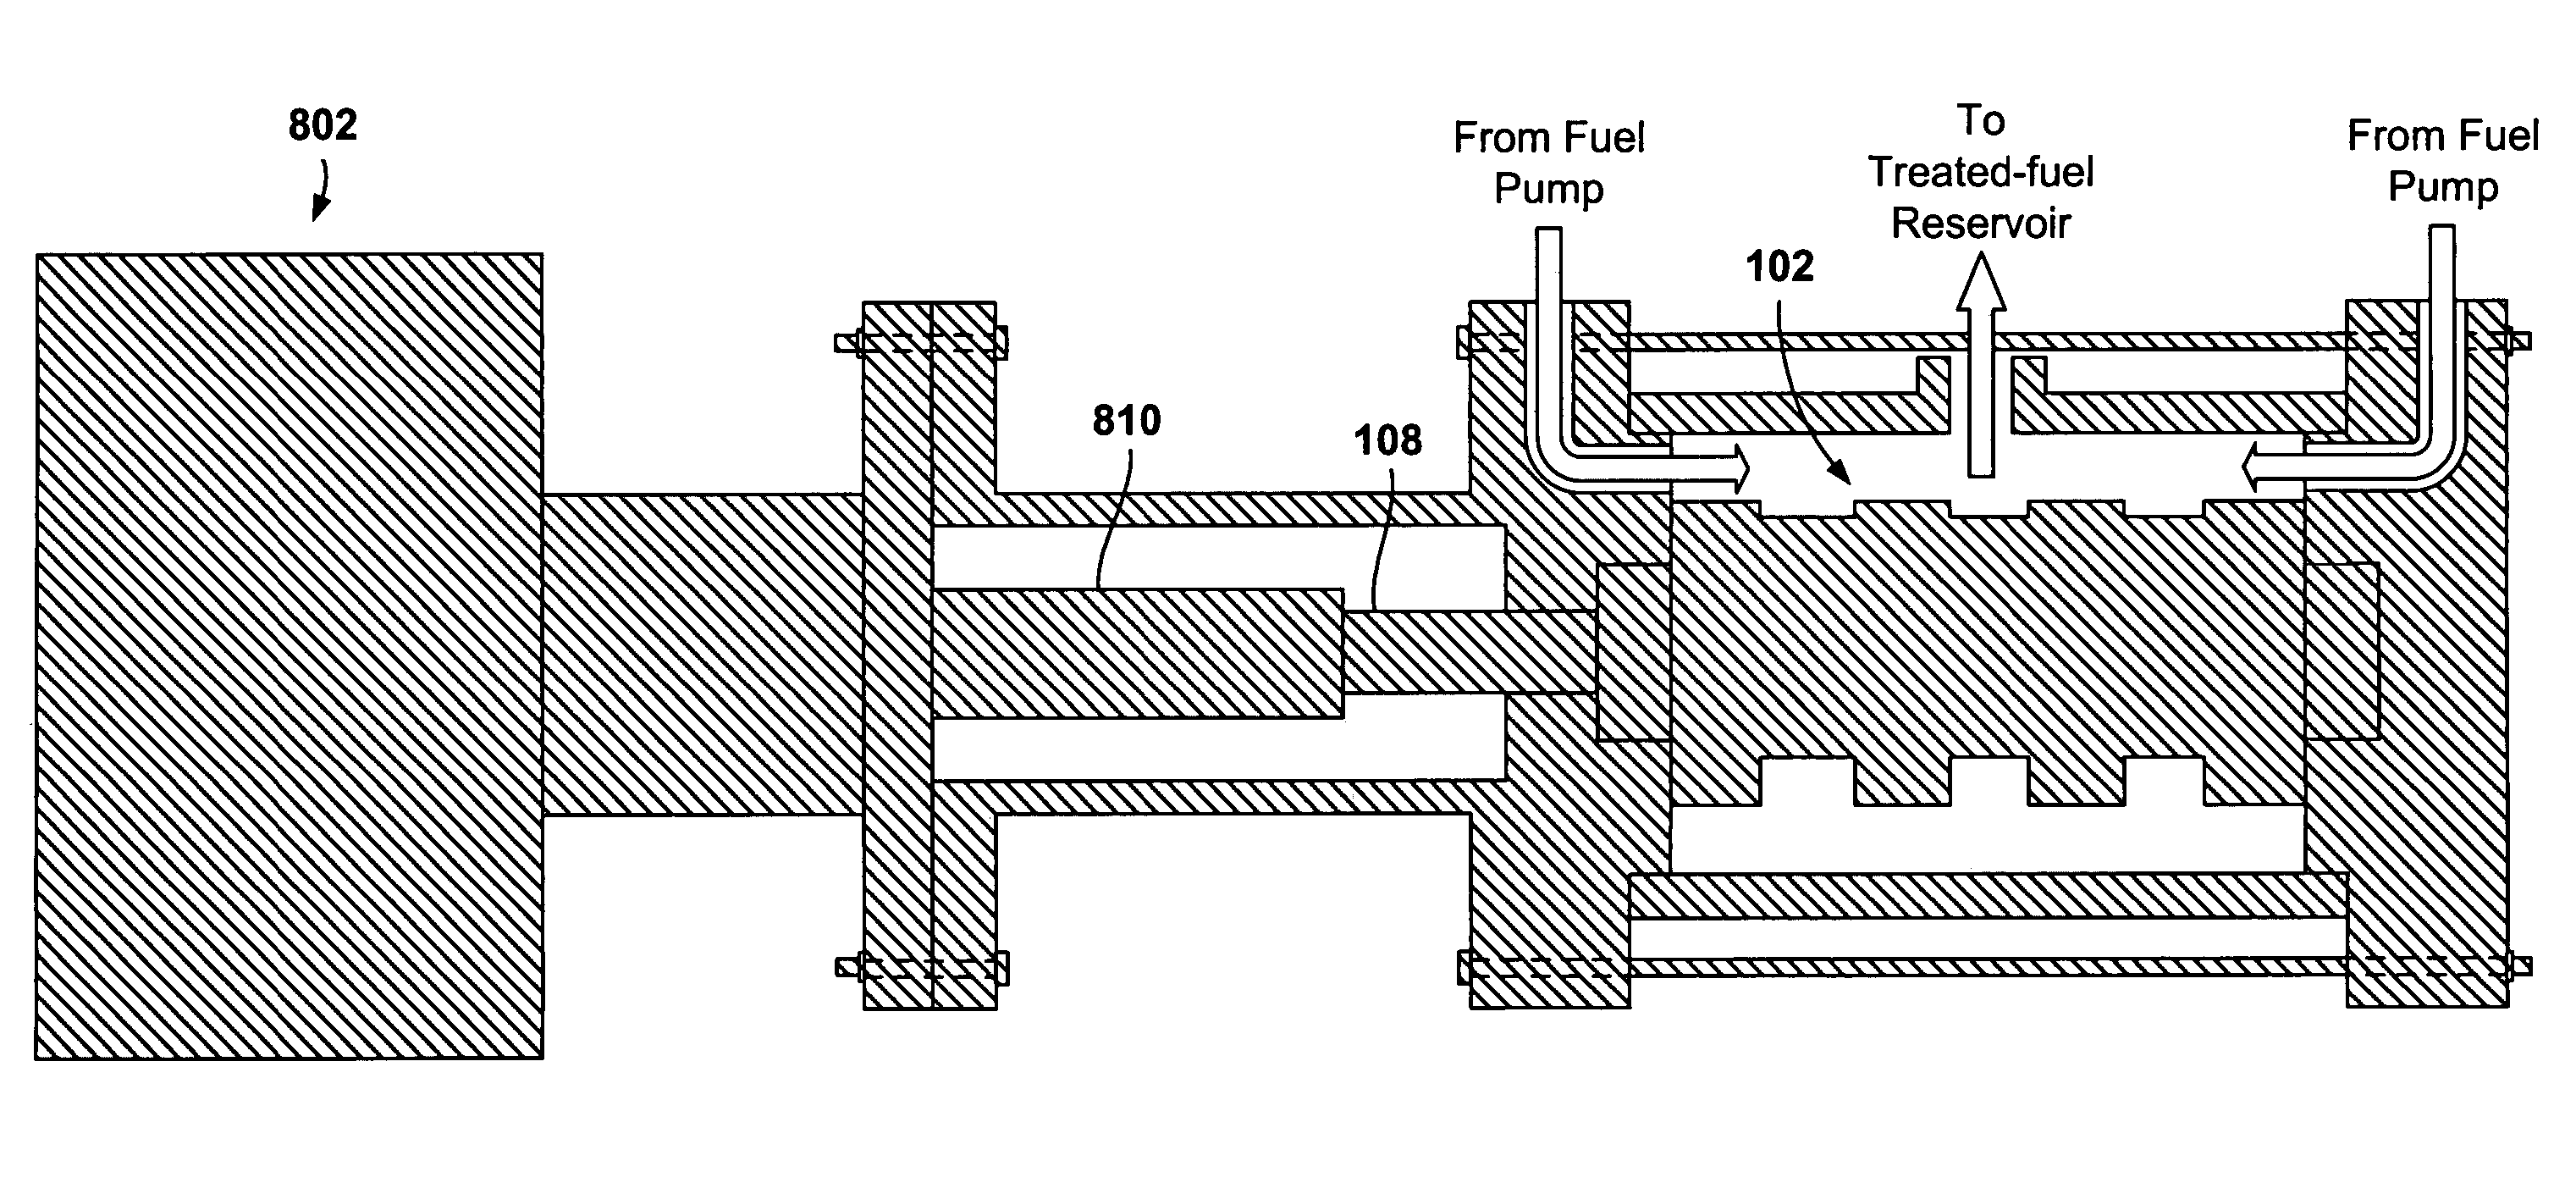 System and method for treating fuel to increase fuel efficiency in internal combustion engines